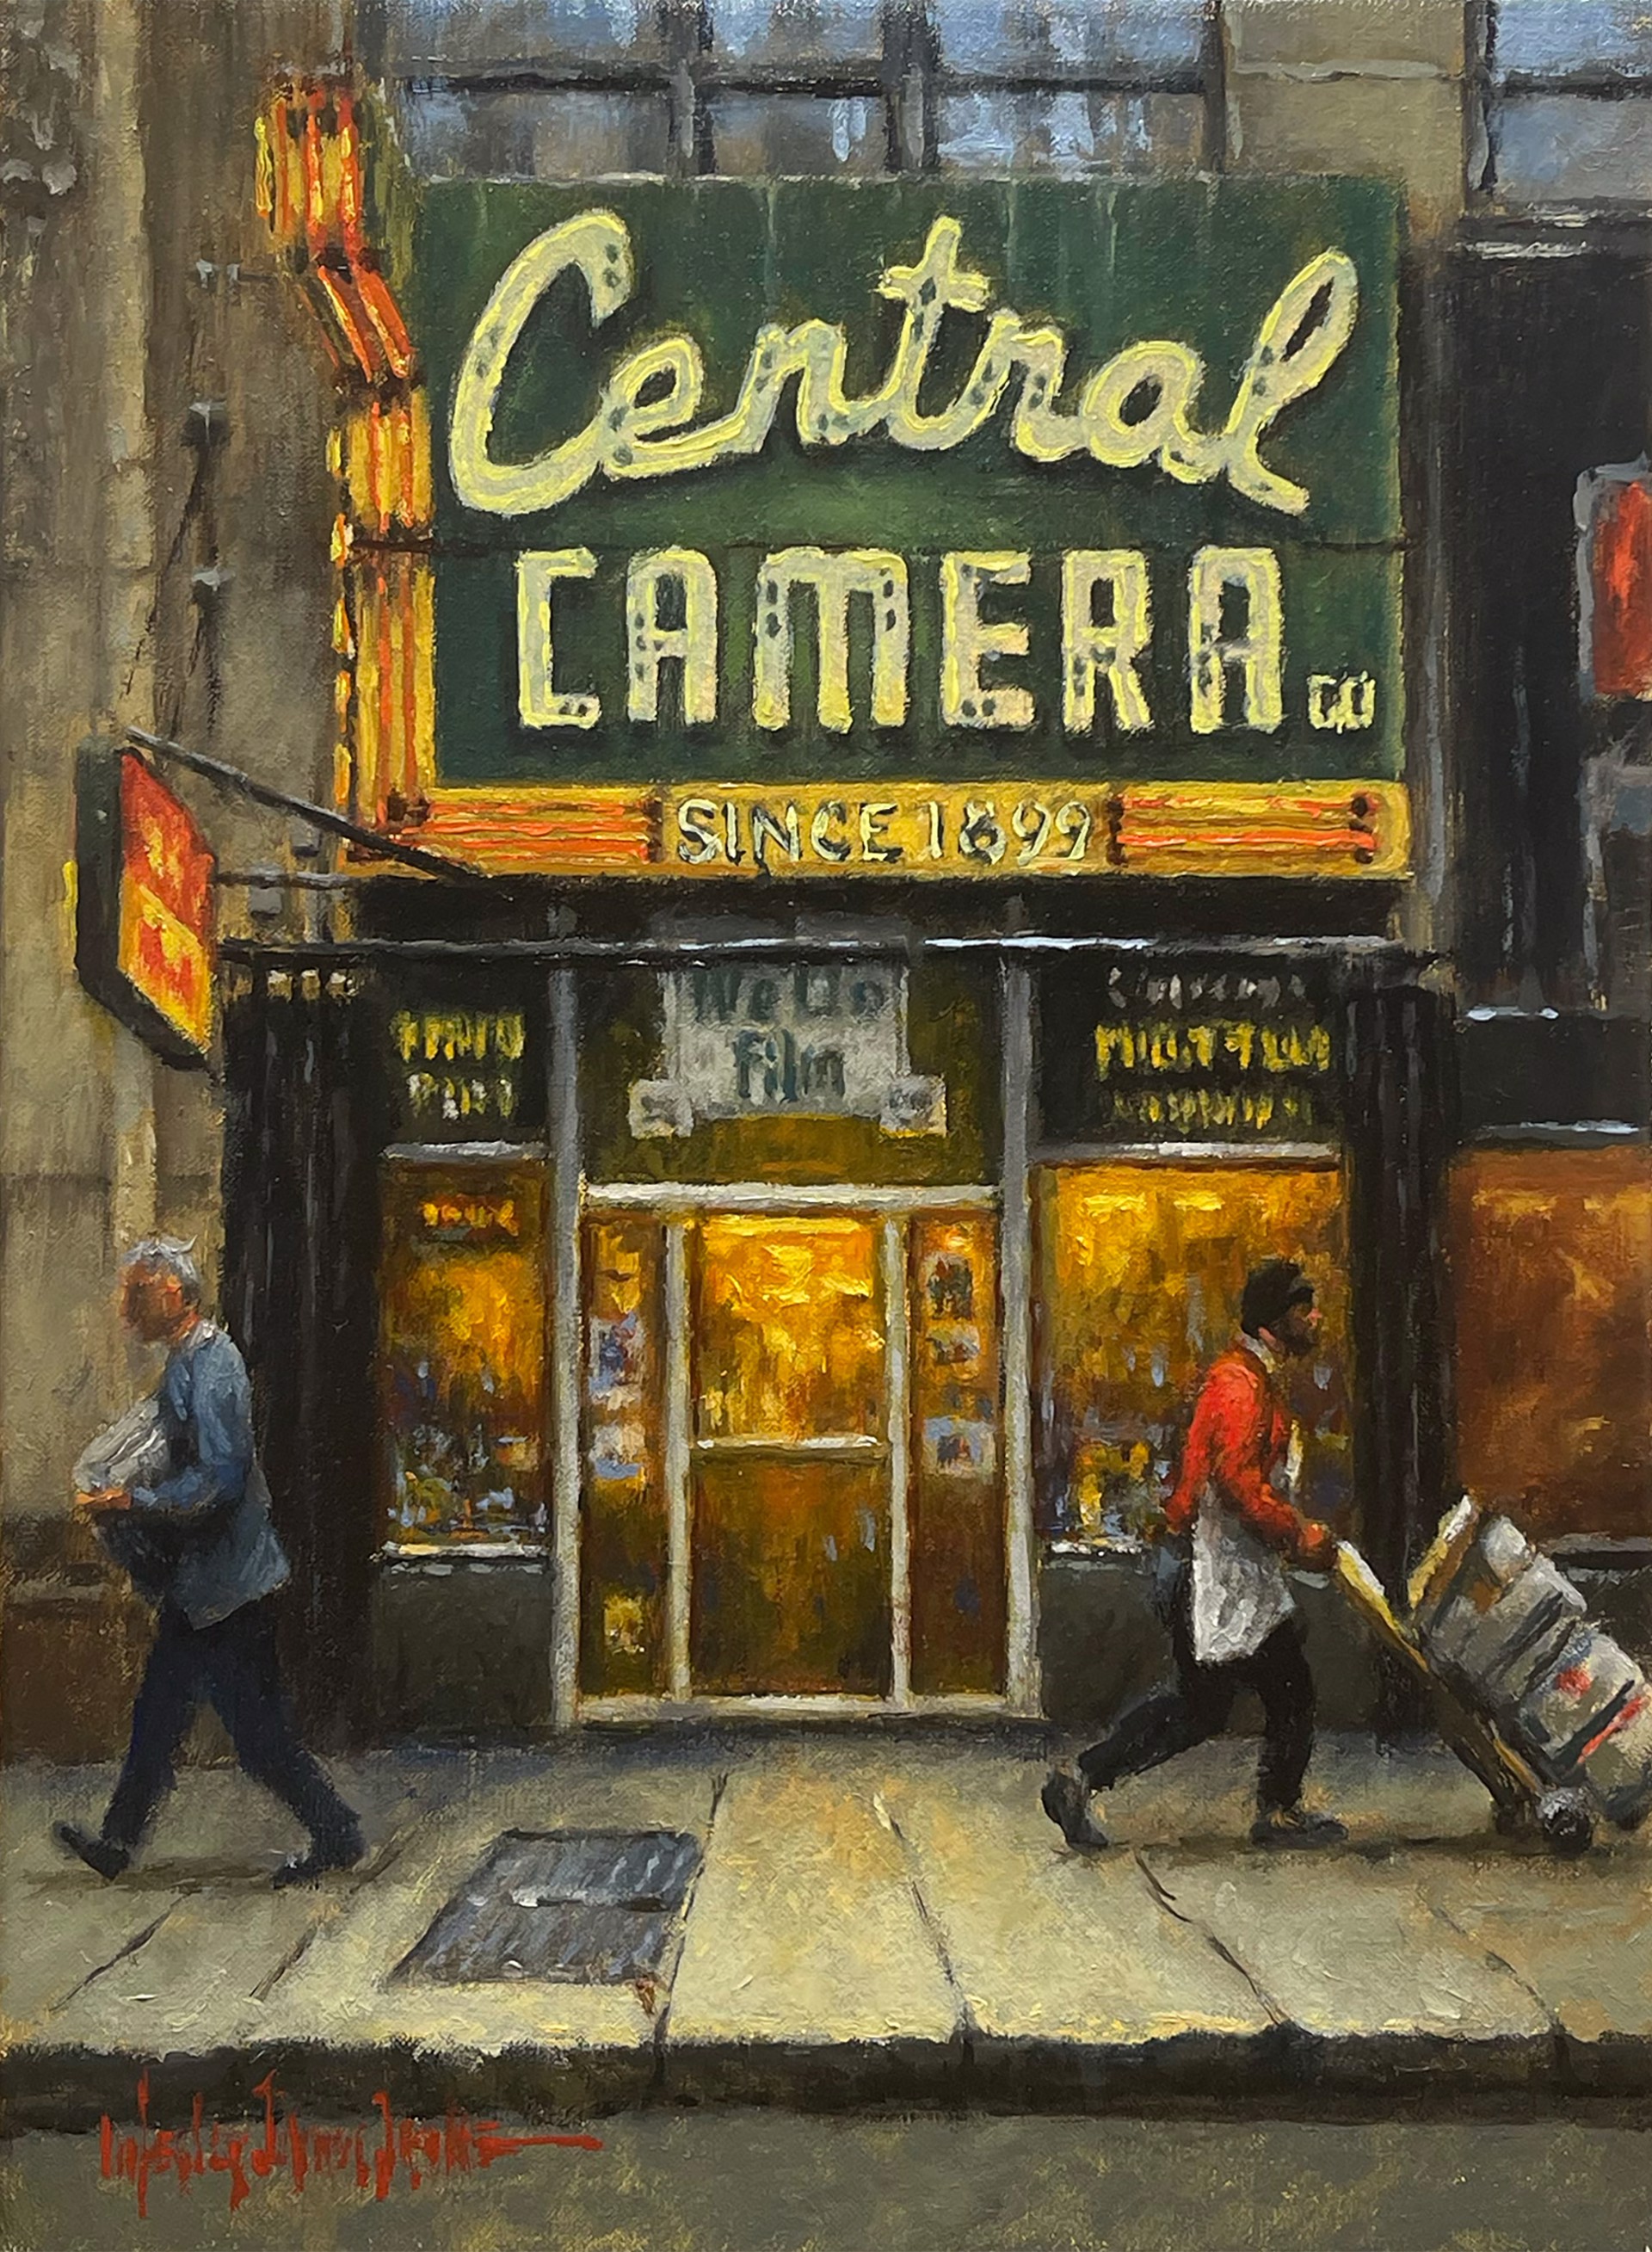 Central Camera, Since 1899 by Wesley James Drake